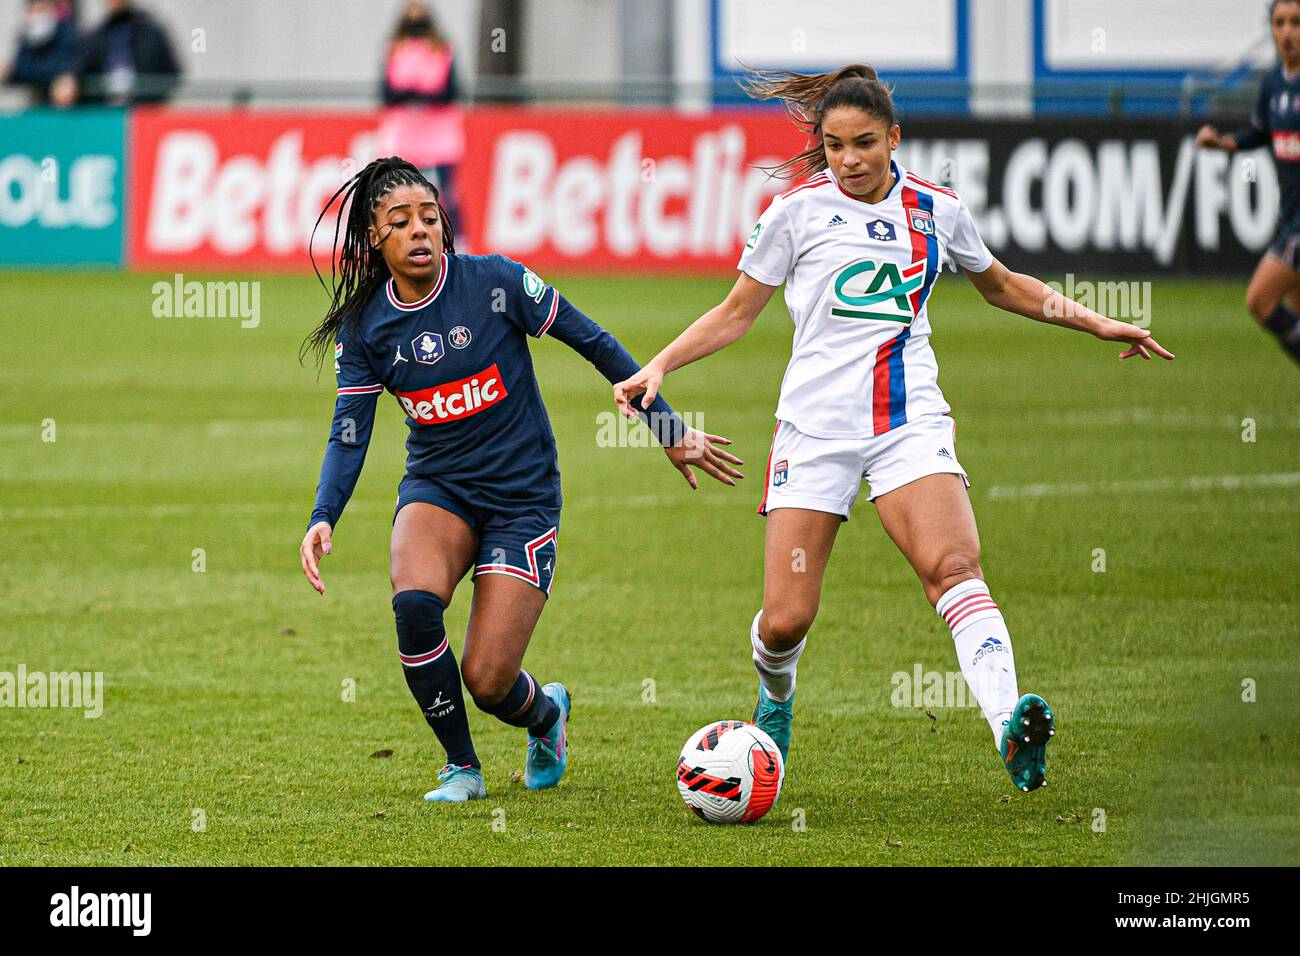 Saint-Germain-en-Laye, France. 29th Jan, 2022. Ashley Lawrence of PSG  (left) and Delphine Cascarino of Olympique Lyonnais during the Women's  French Cup, round of 16 football match between Paris Saint-Germain and  Olympique Lyonnais (